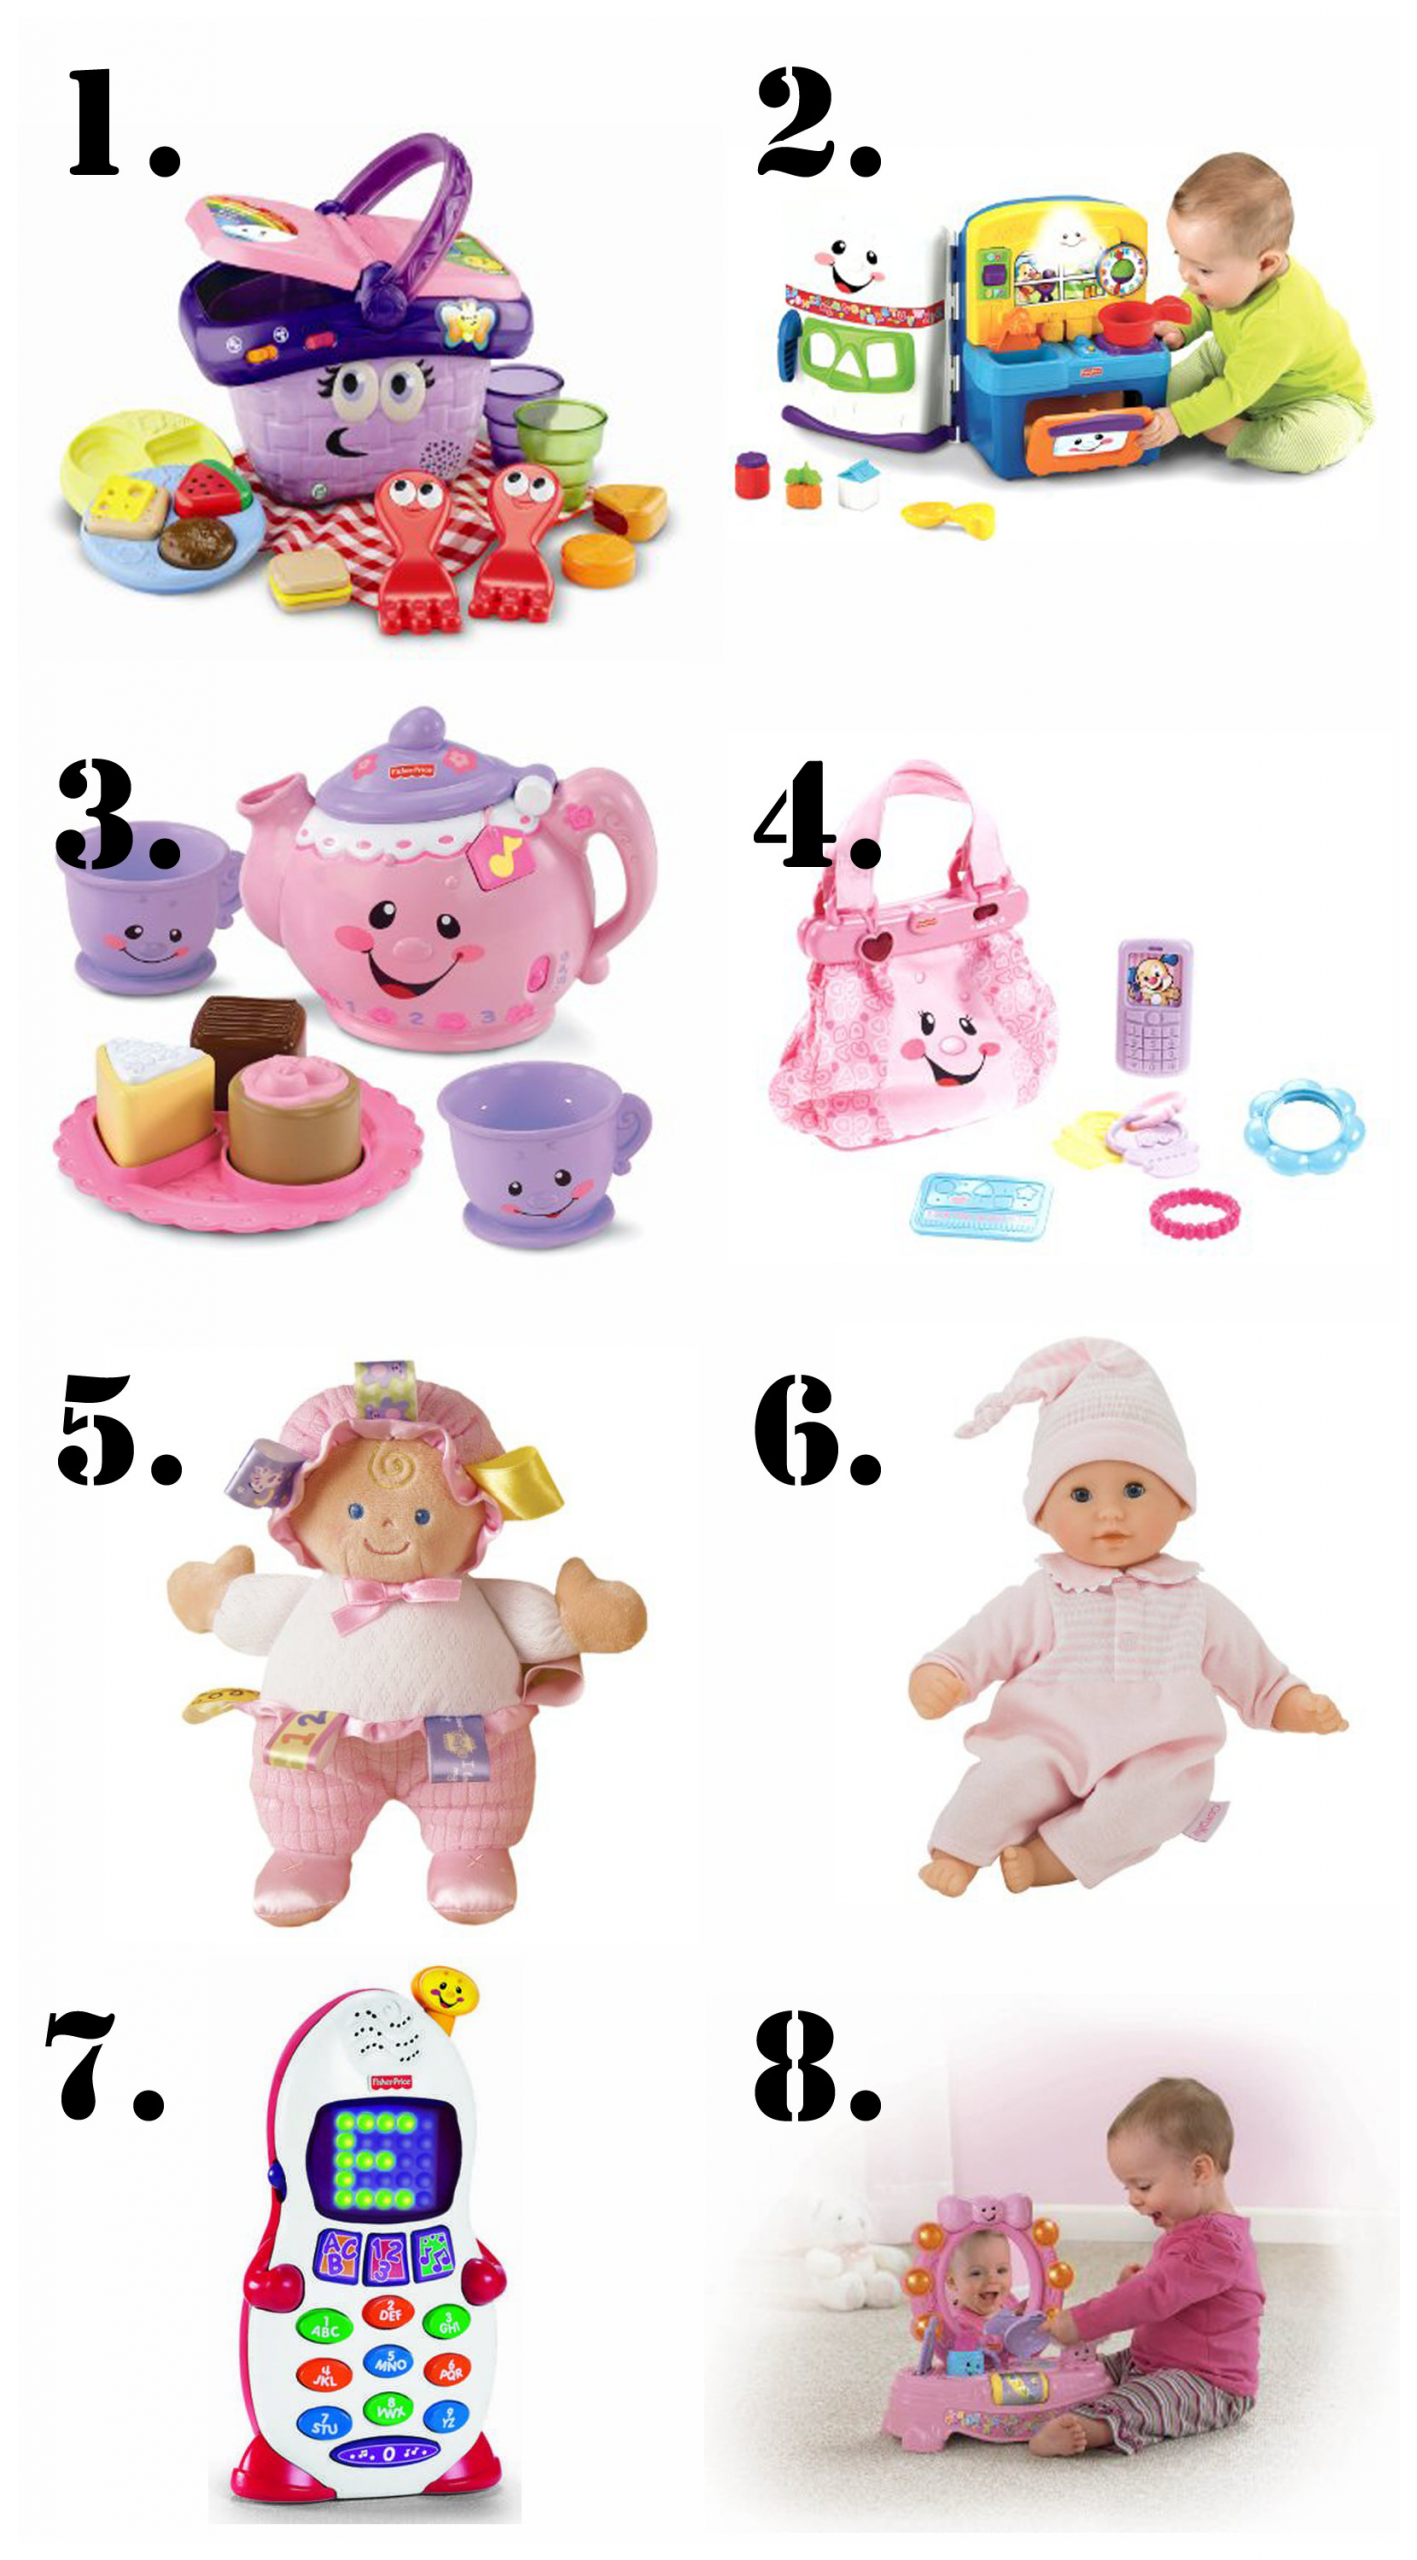 1st Birthday Gift Ideas For Girls
 best birthday presents for a 1 year old